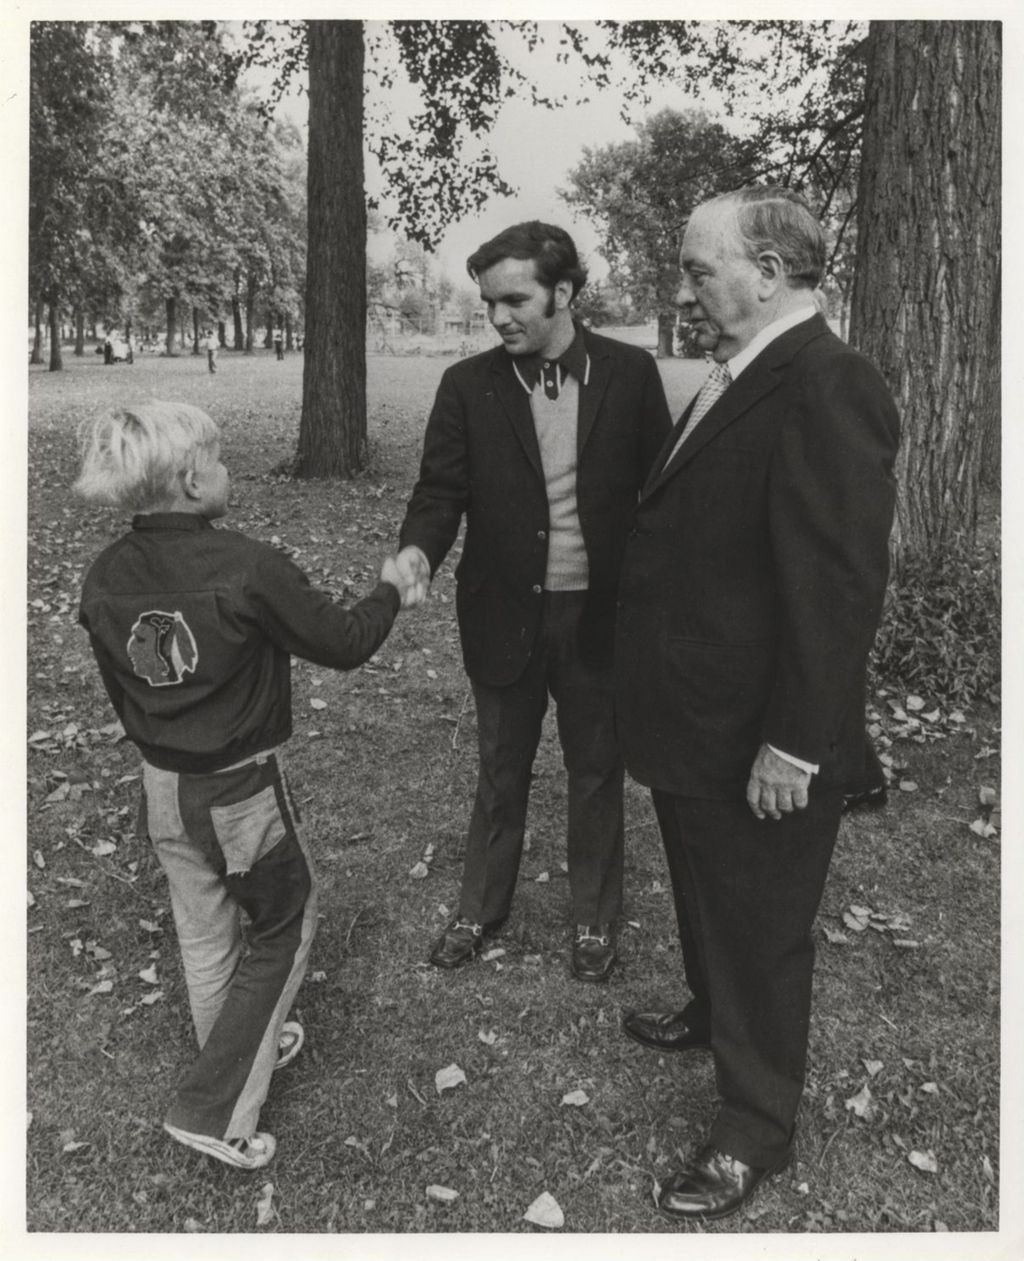 Richard M. Daley greets a young boy as Richard J. Daley looks on